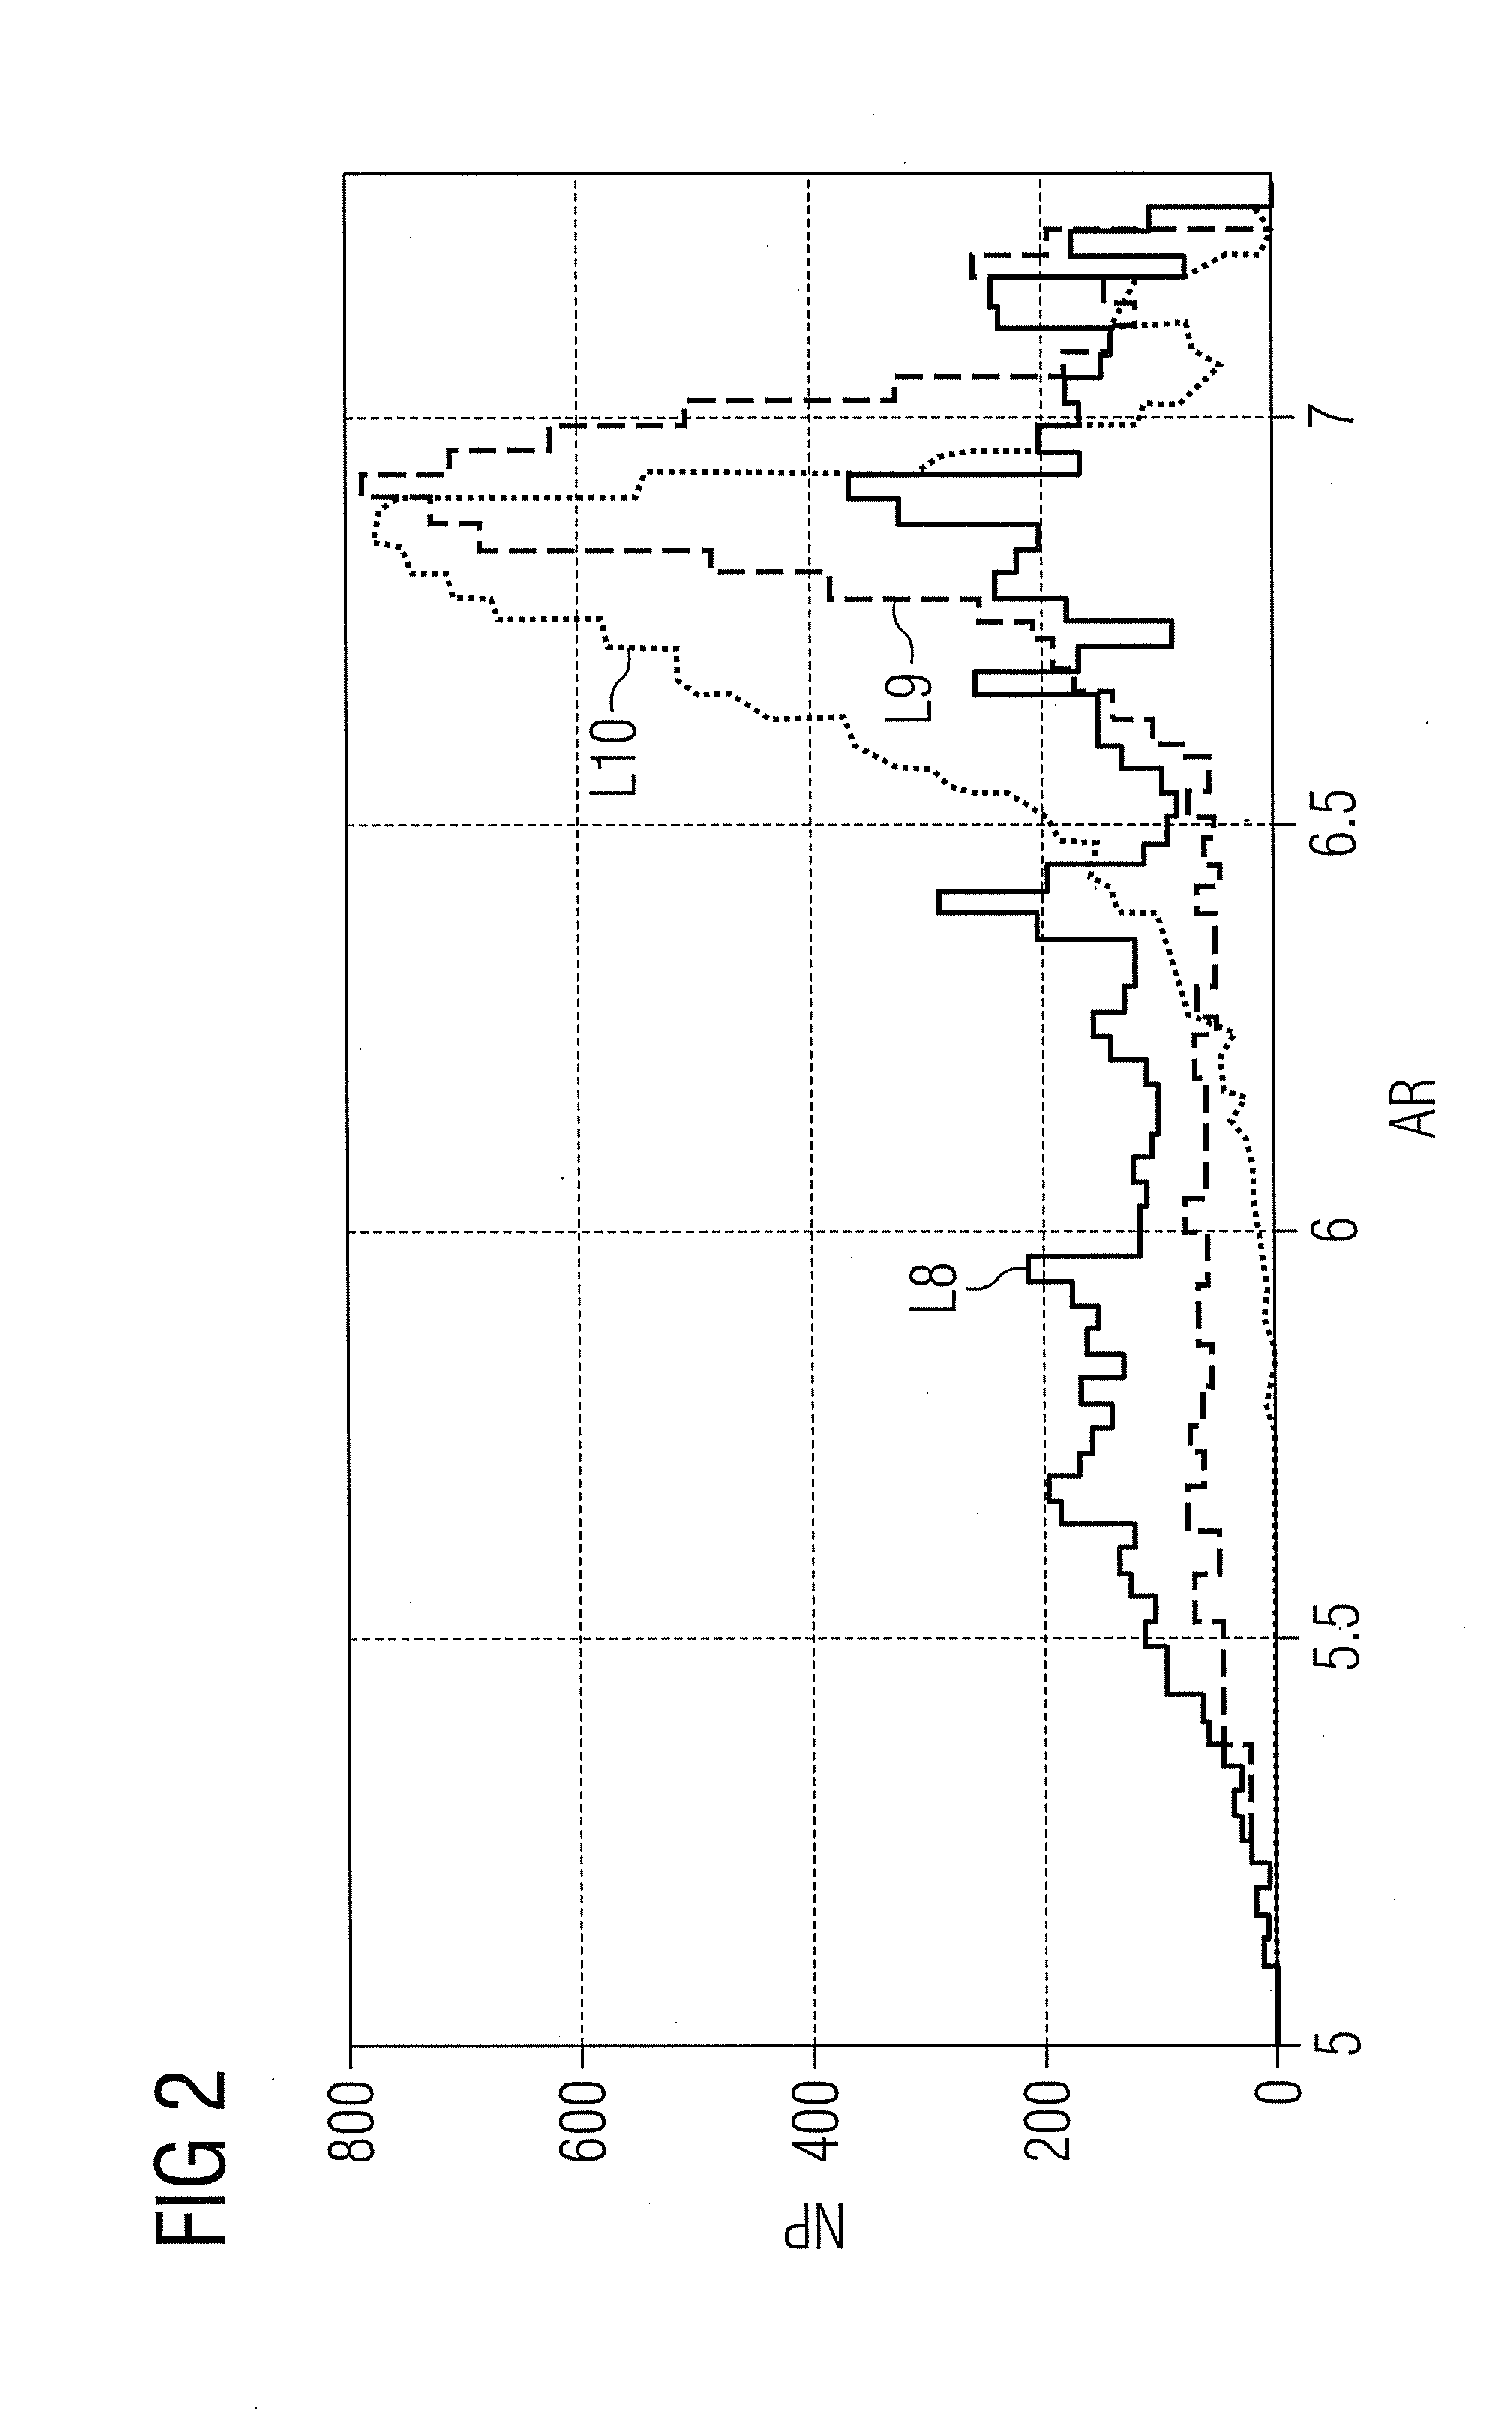 Method for the computer-assisted learning of a control and/or a feedback control of a technical system